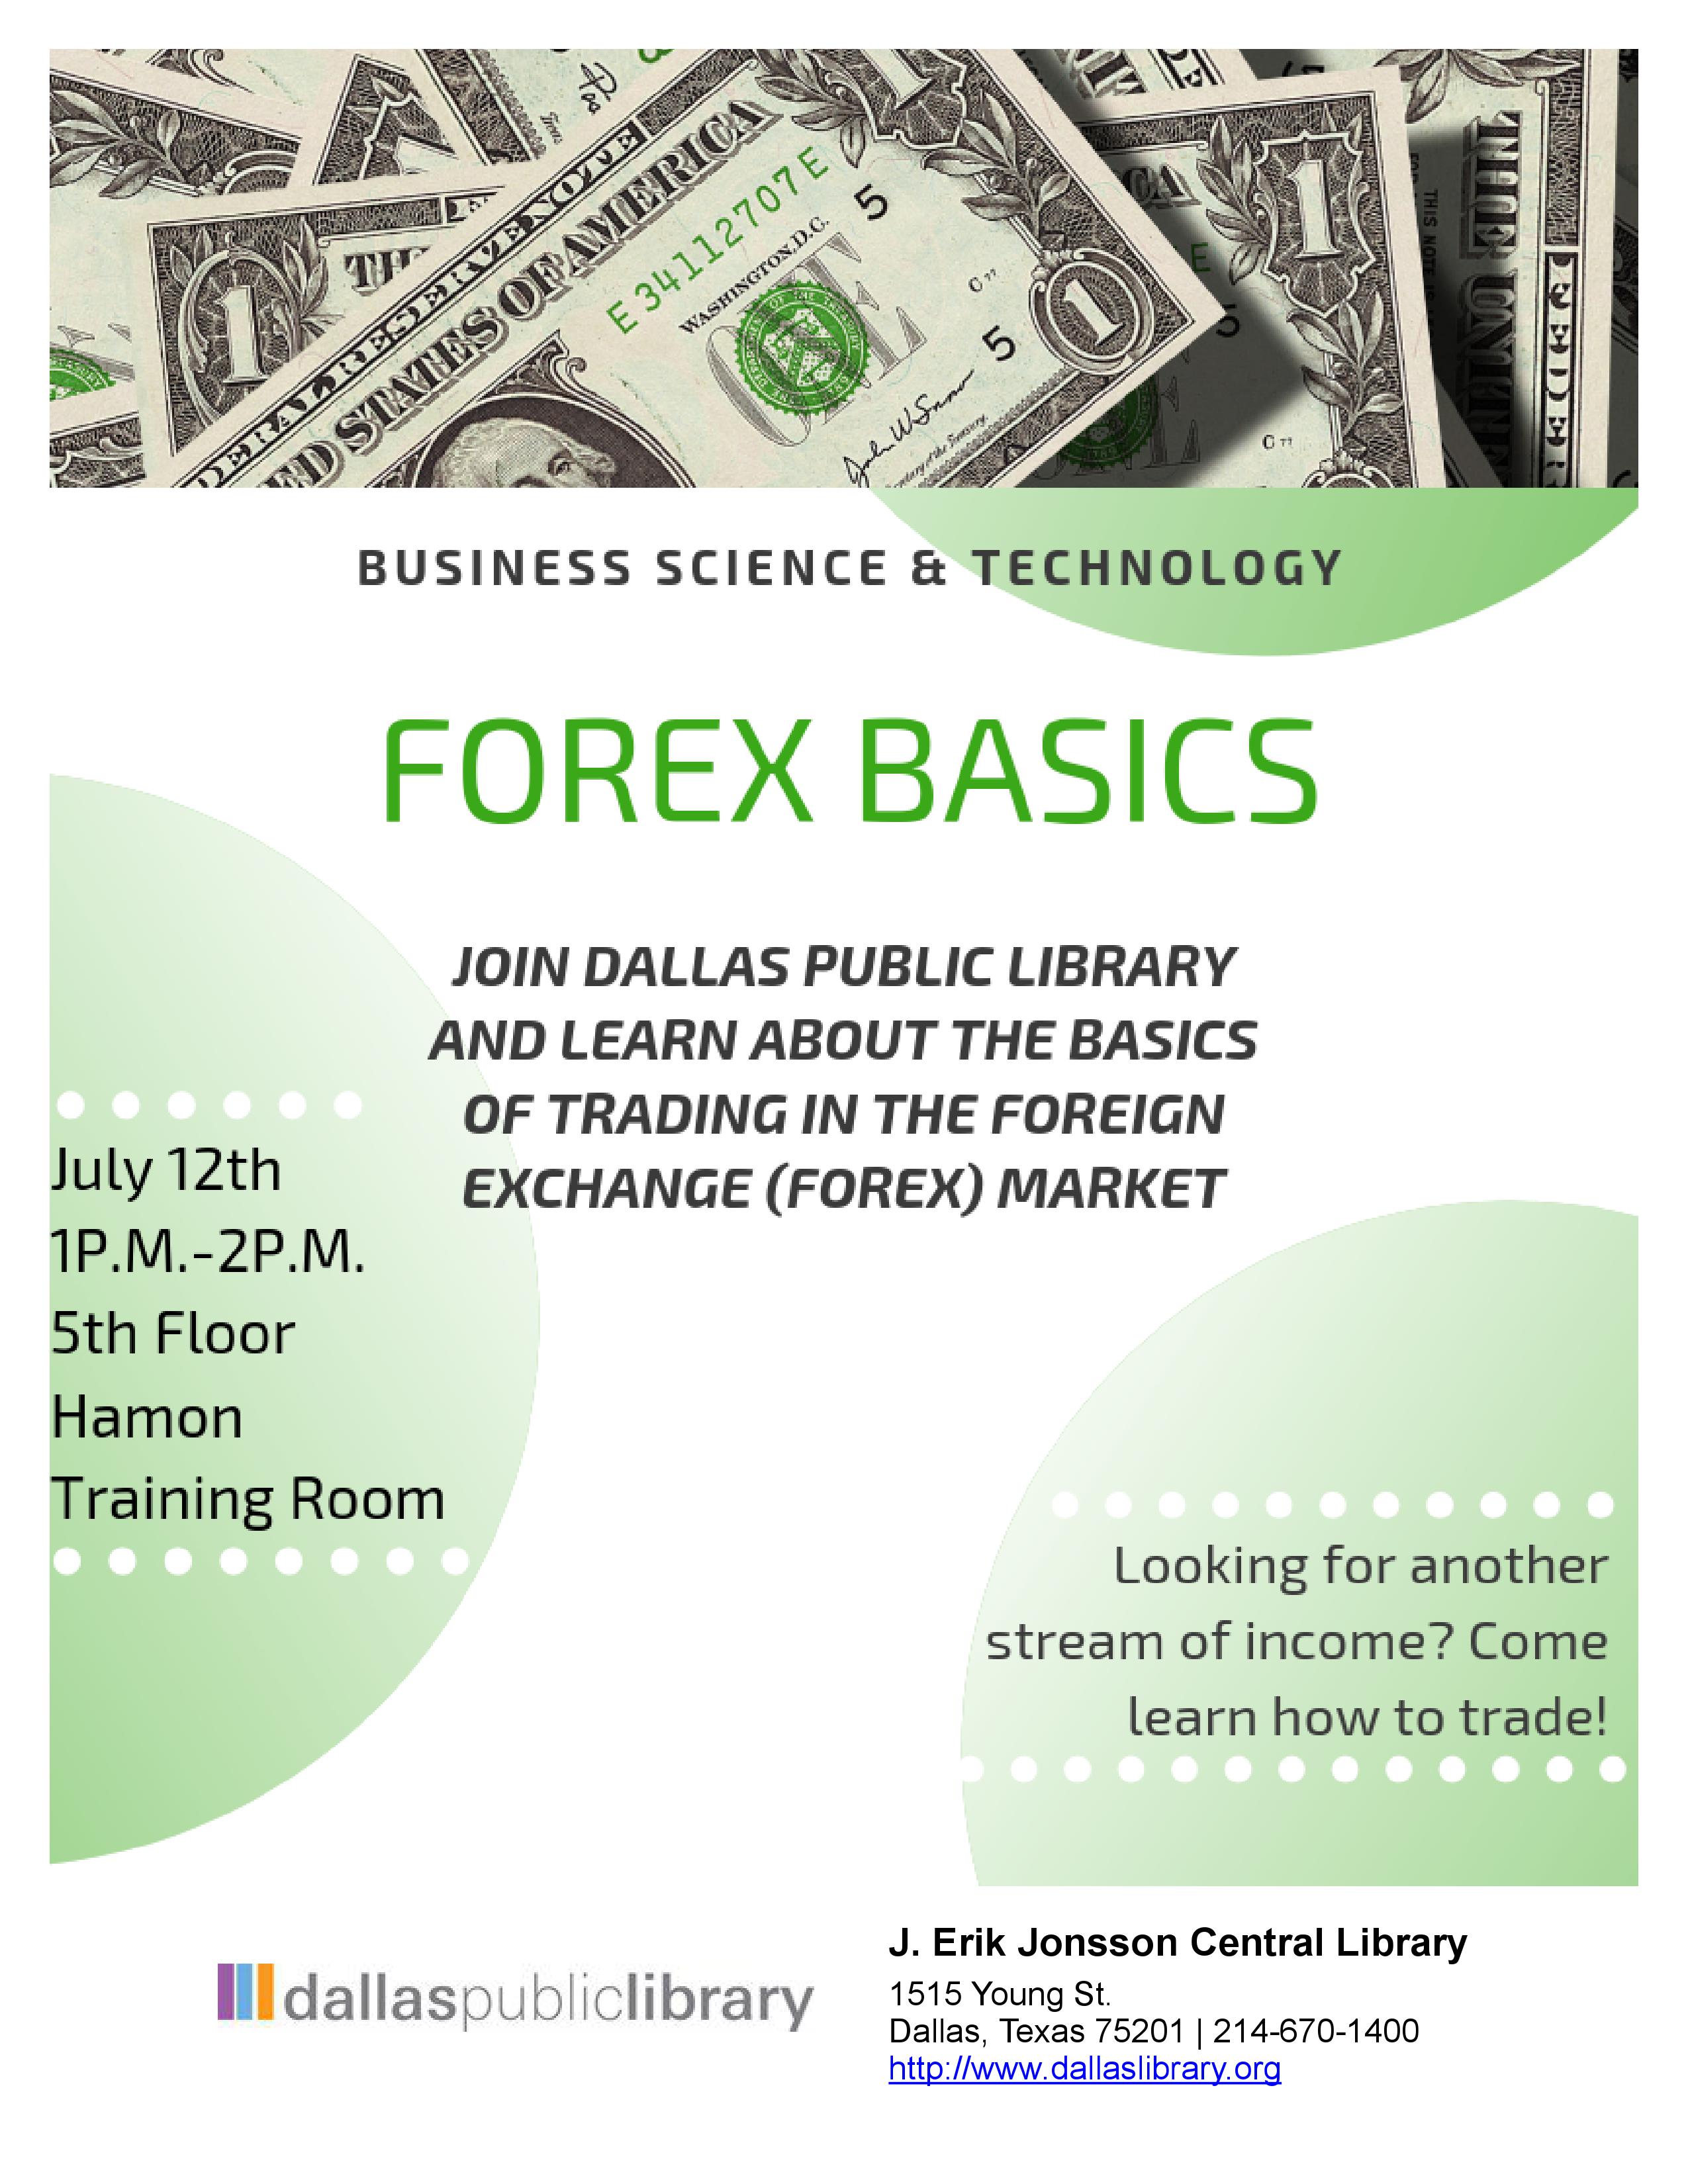 Come learn the basics of how to trade in the foreign exchange (Forex) market.